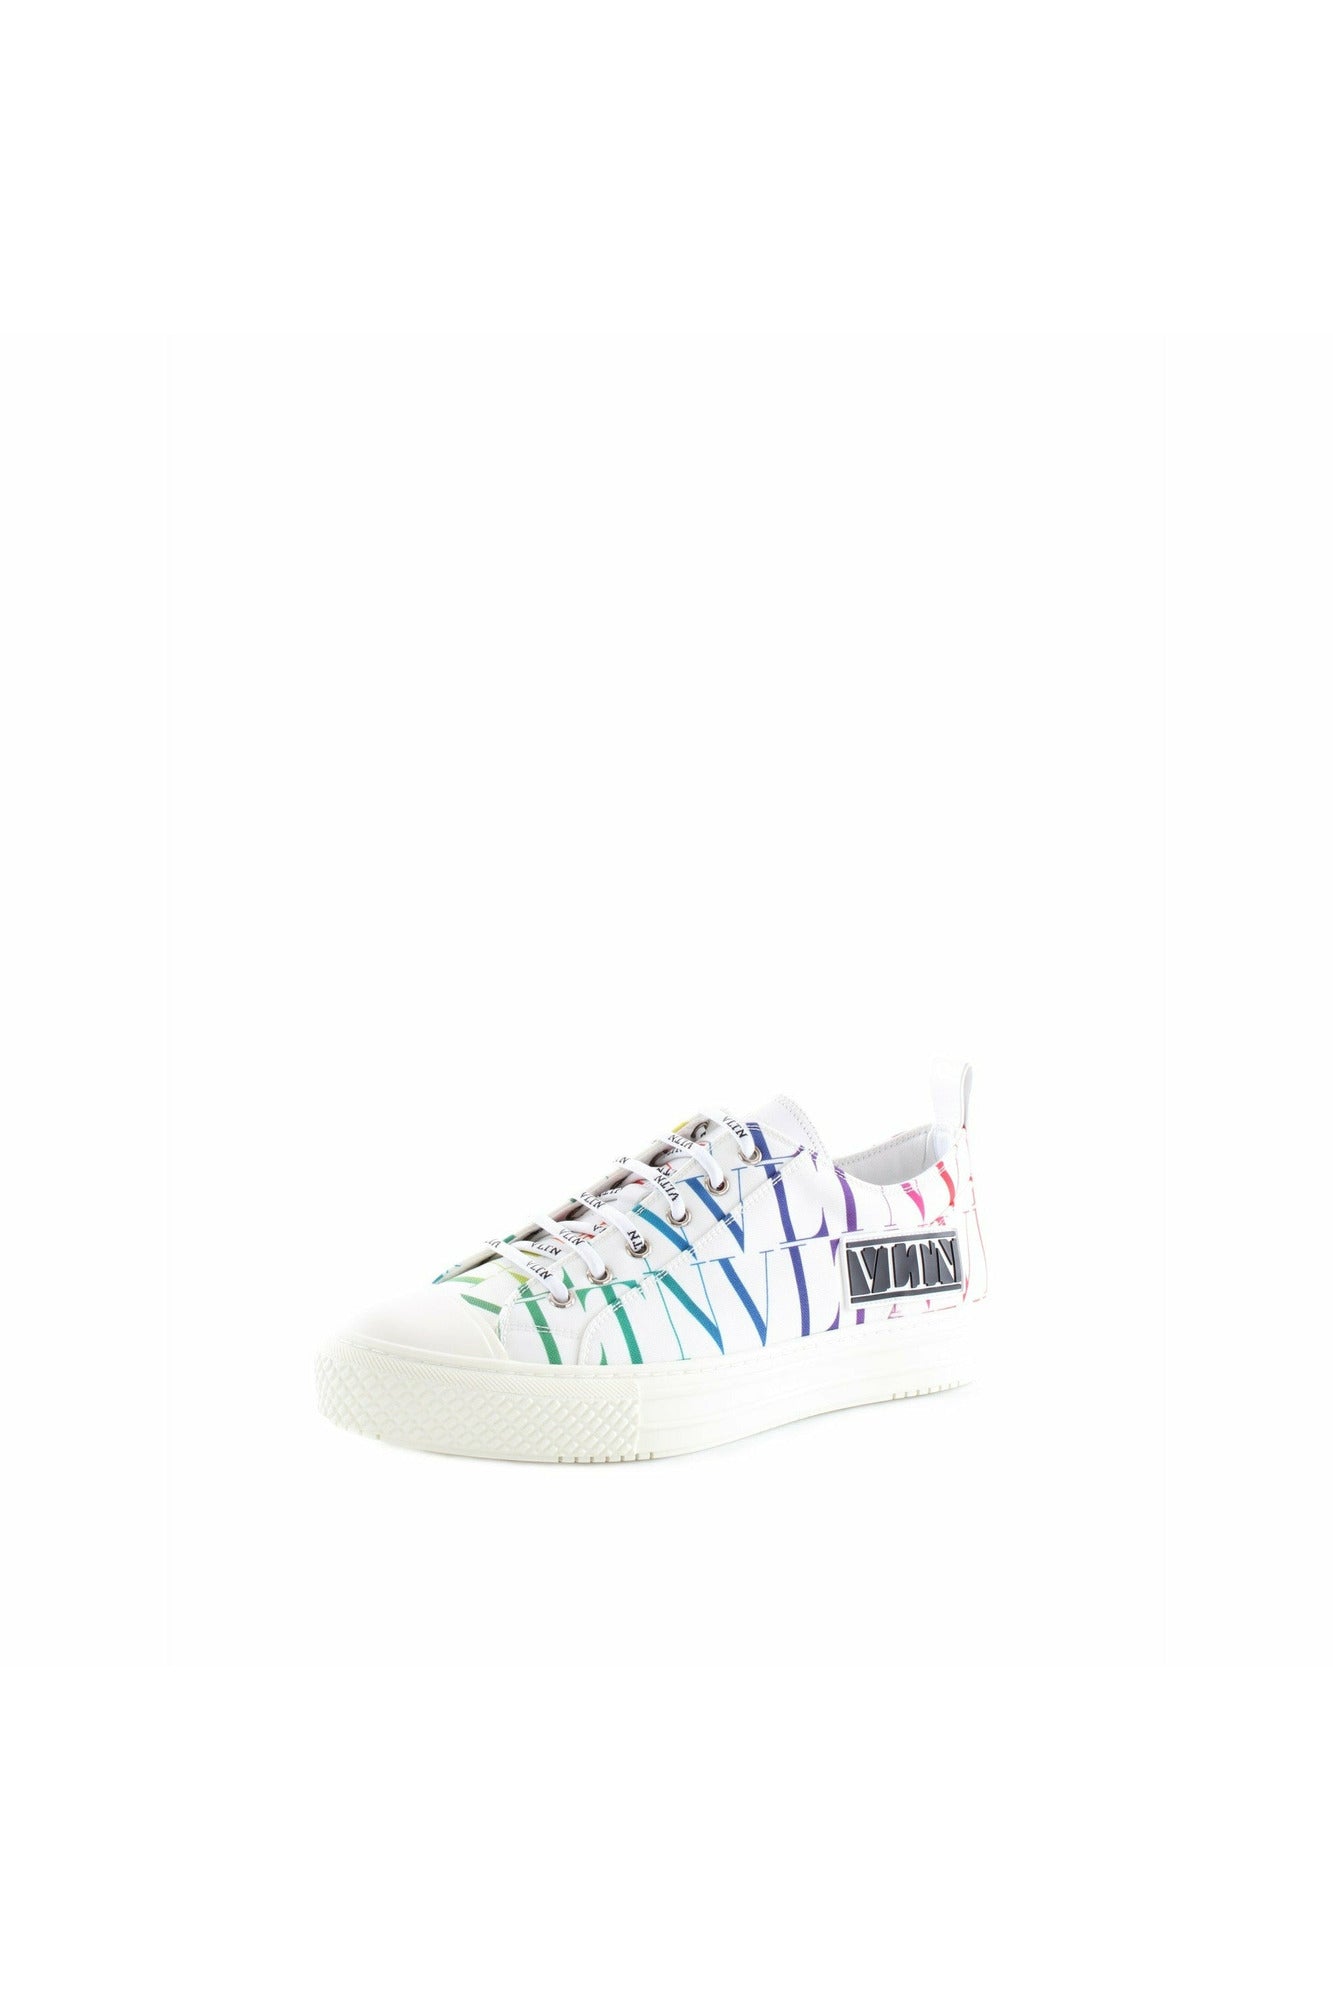 Valentino VY2S0D57WEF sneaker VLTN TIMES GIGGIES LOW TOP in cotone con stampa logo multicolor all over